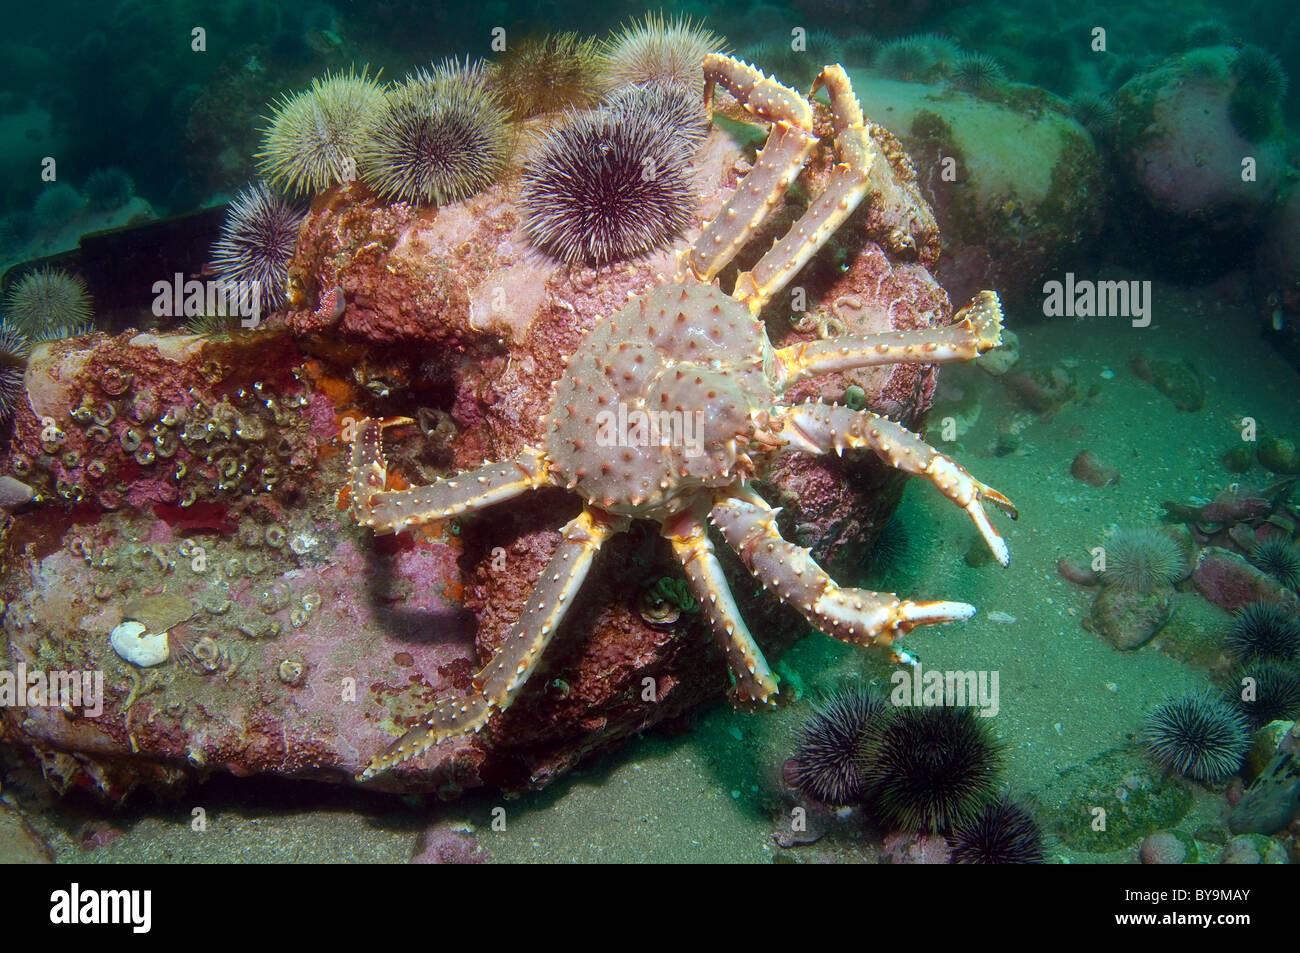 Crab camtschaticus, Red King Crab (Paralithodes camtschaticus) Stock Photo